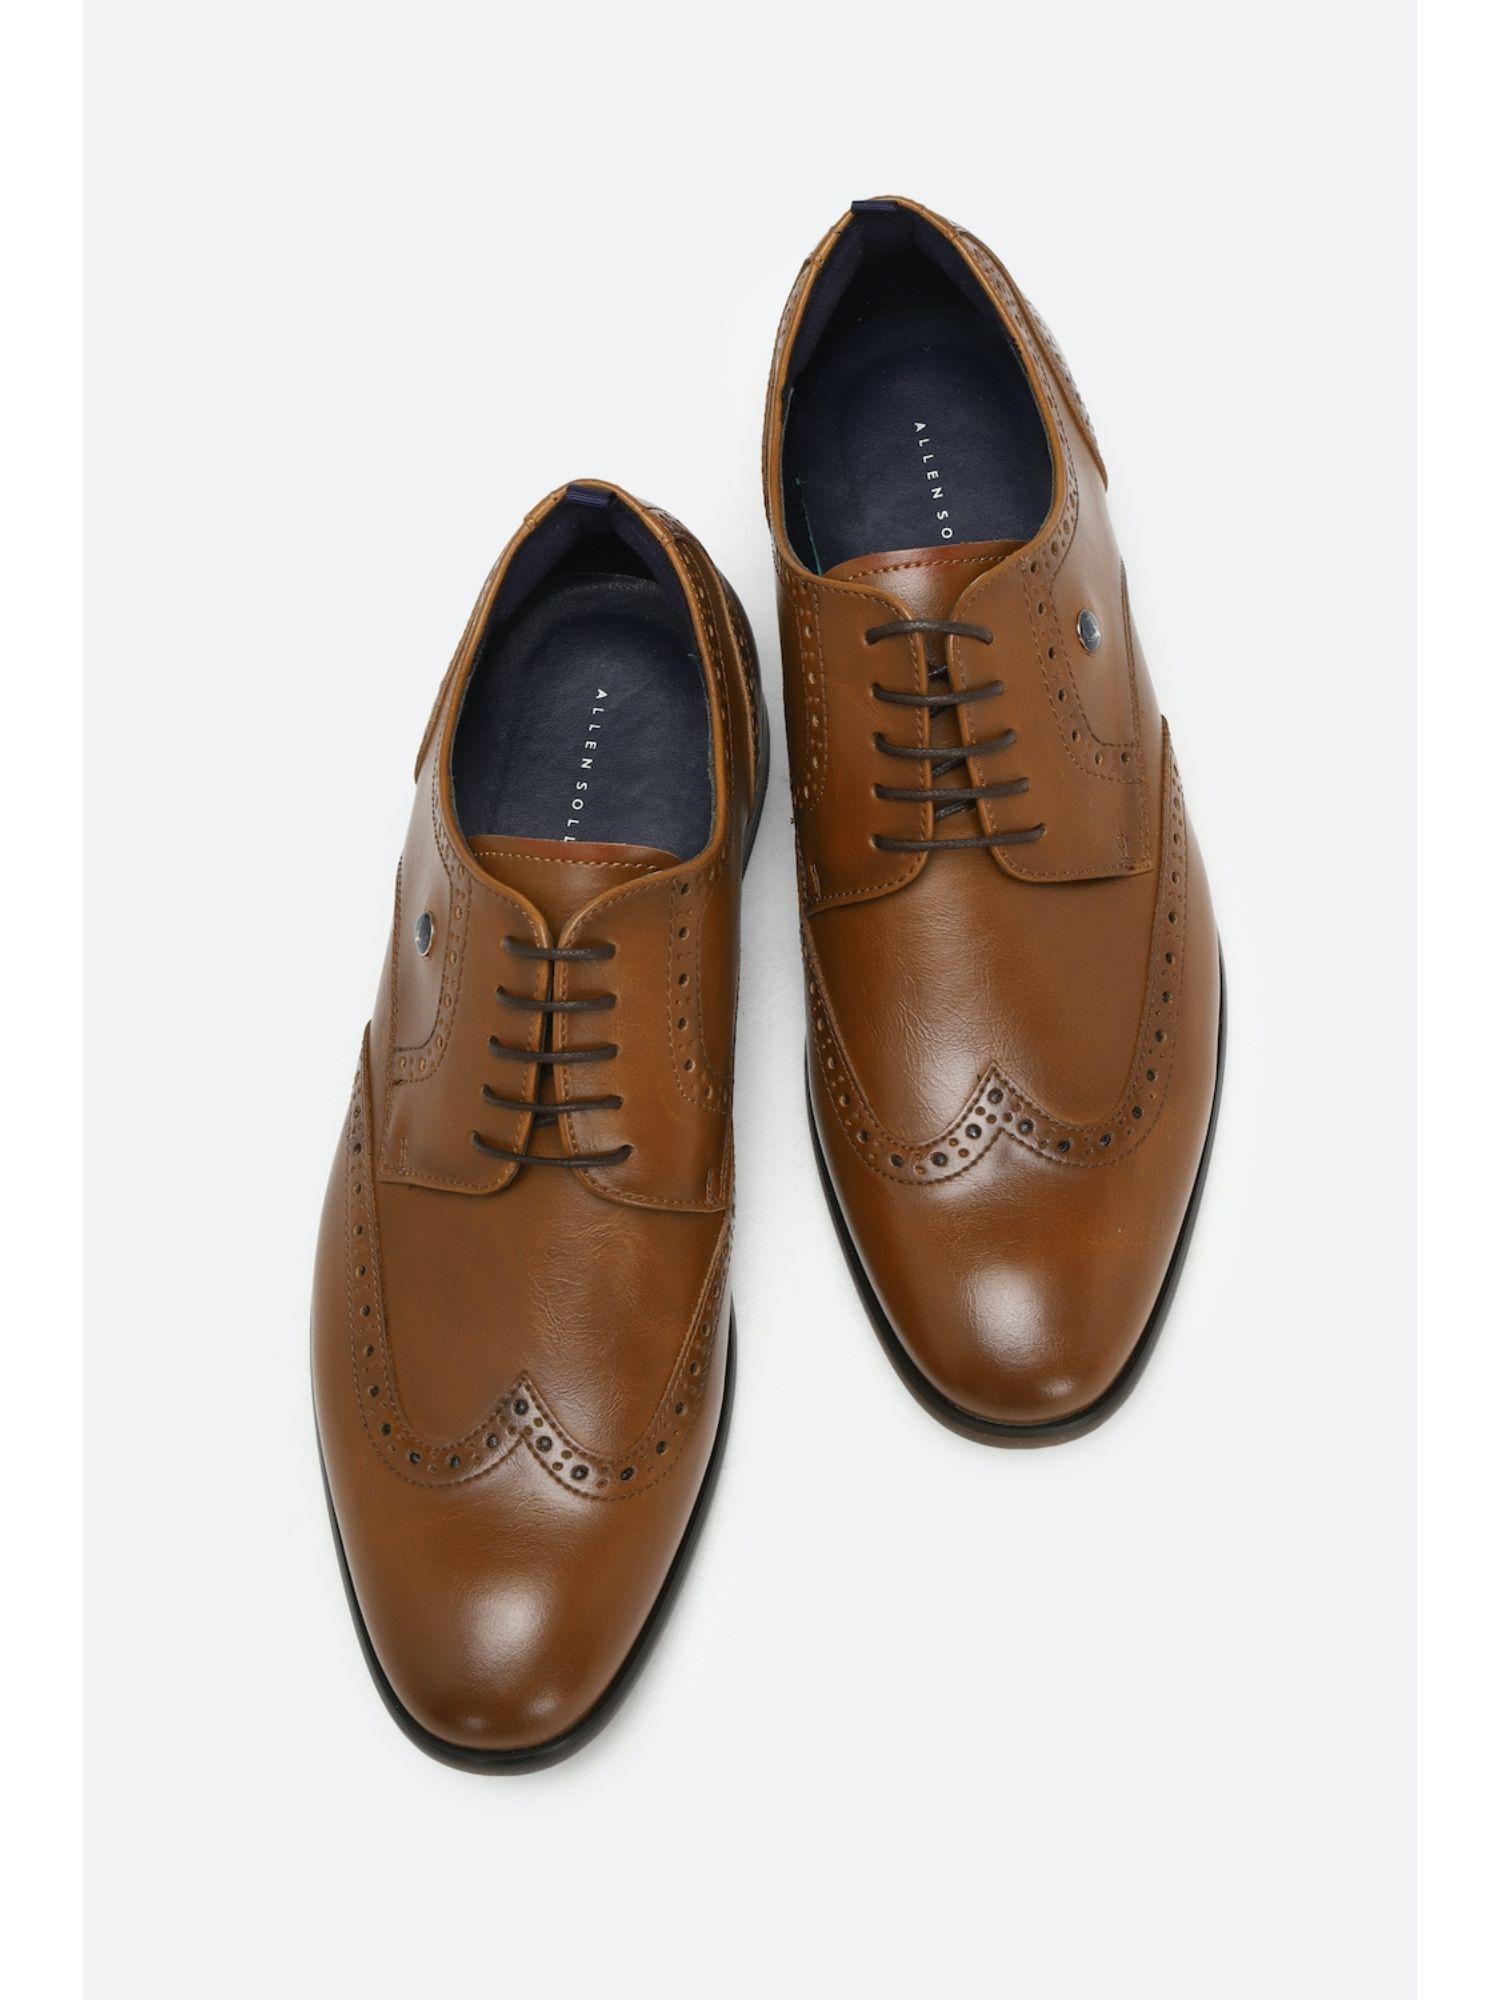 brown derby shoes